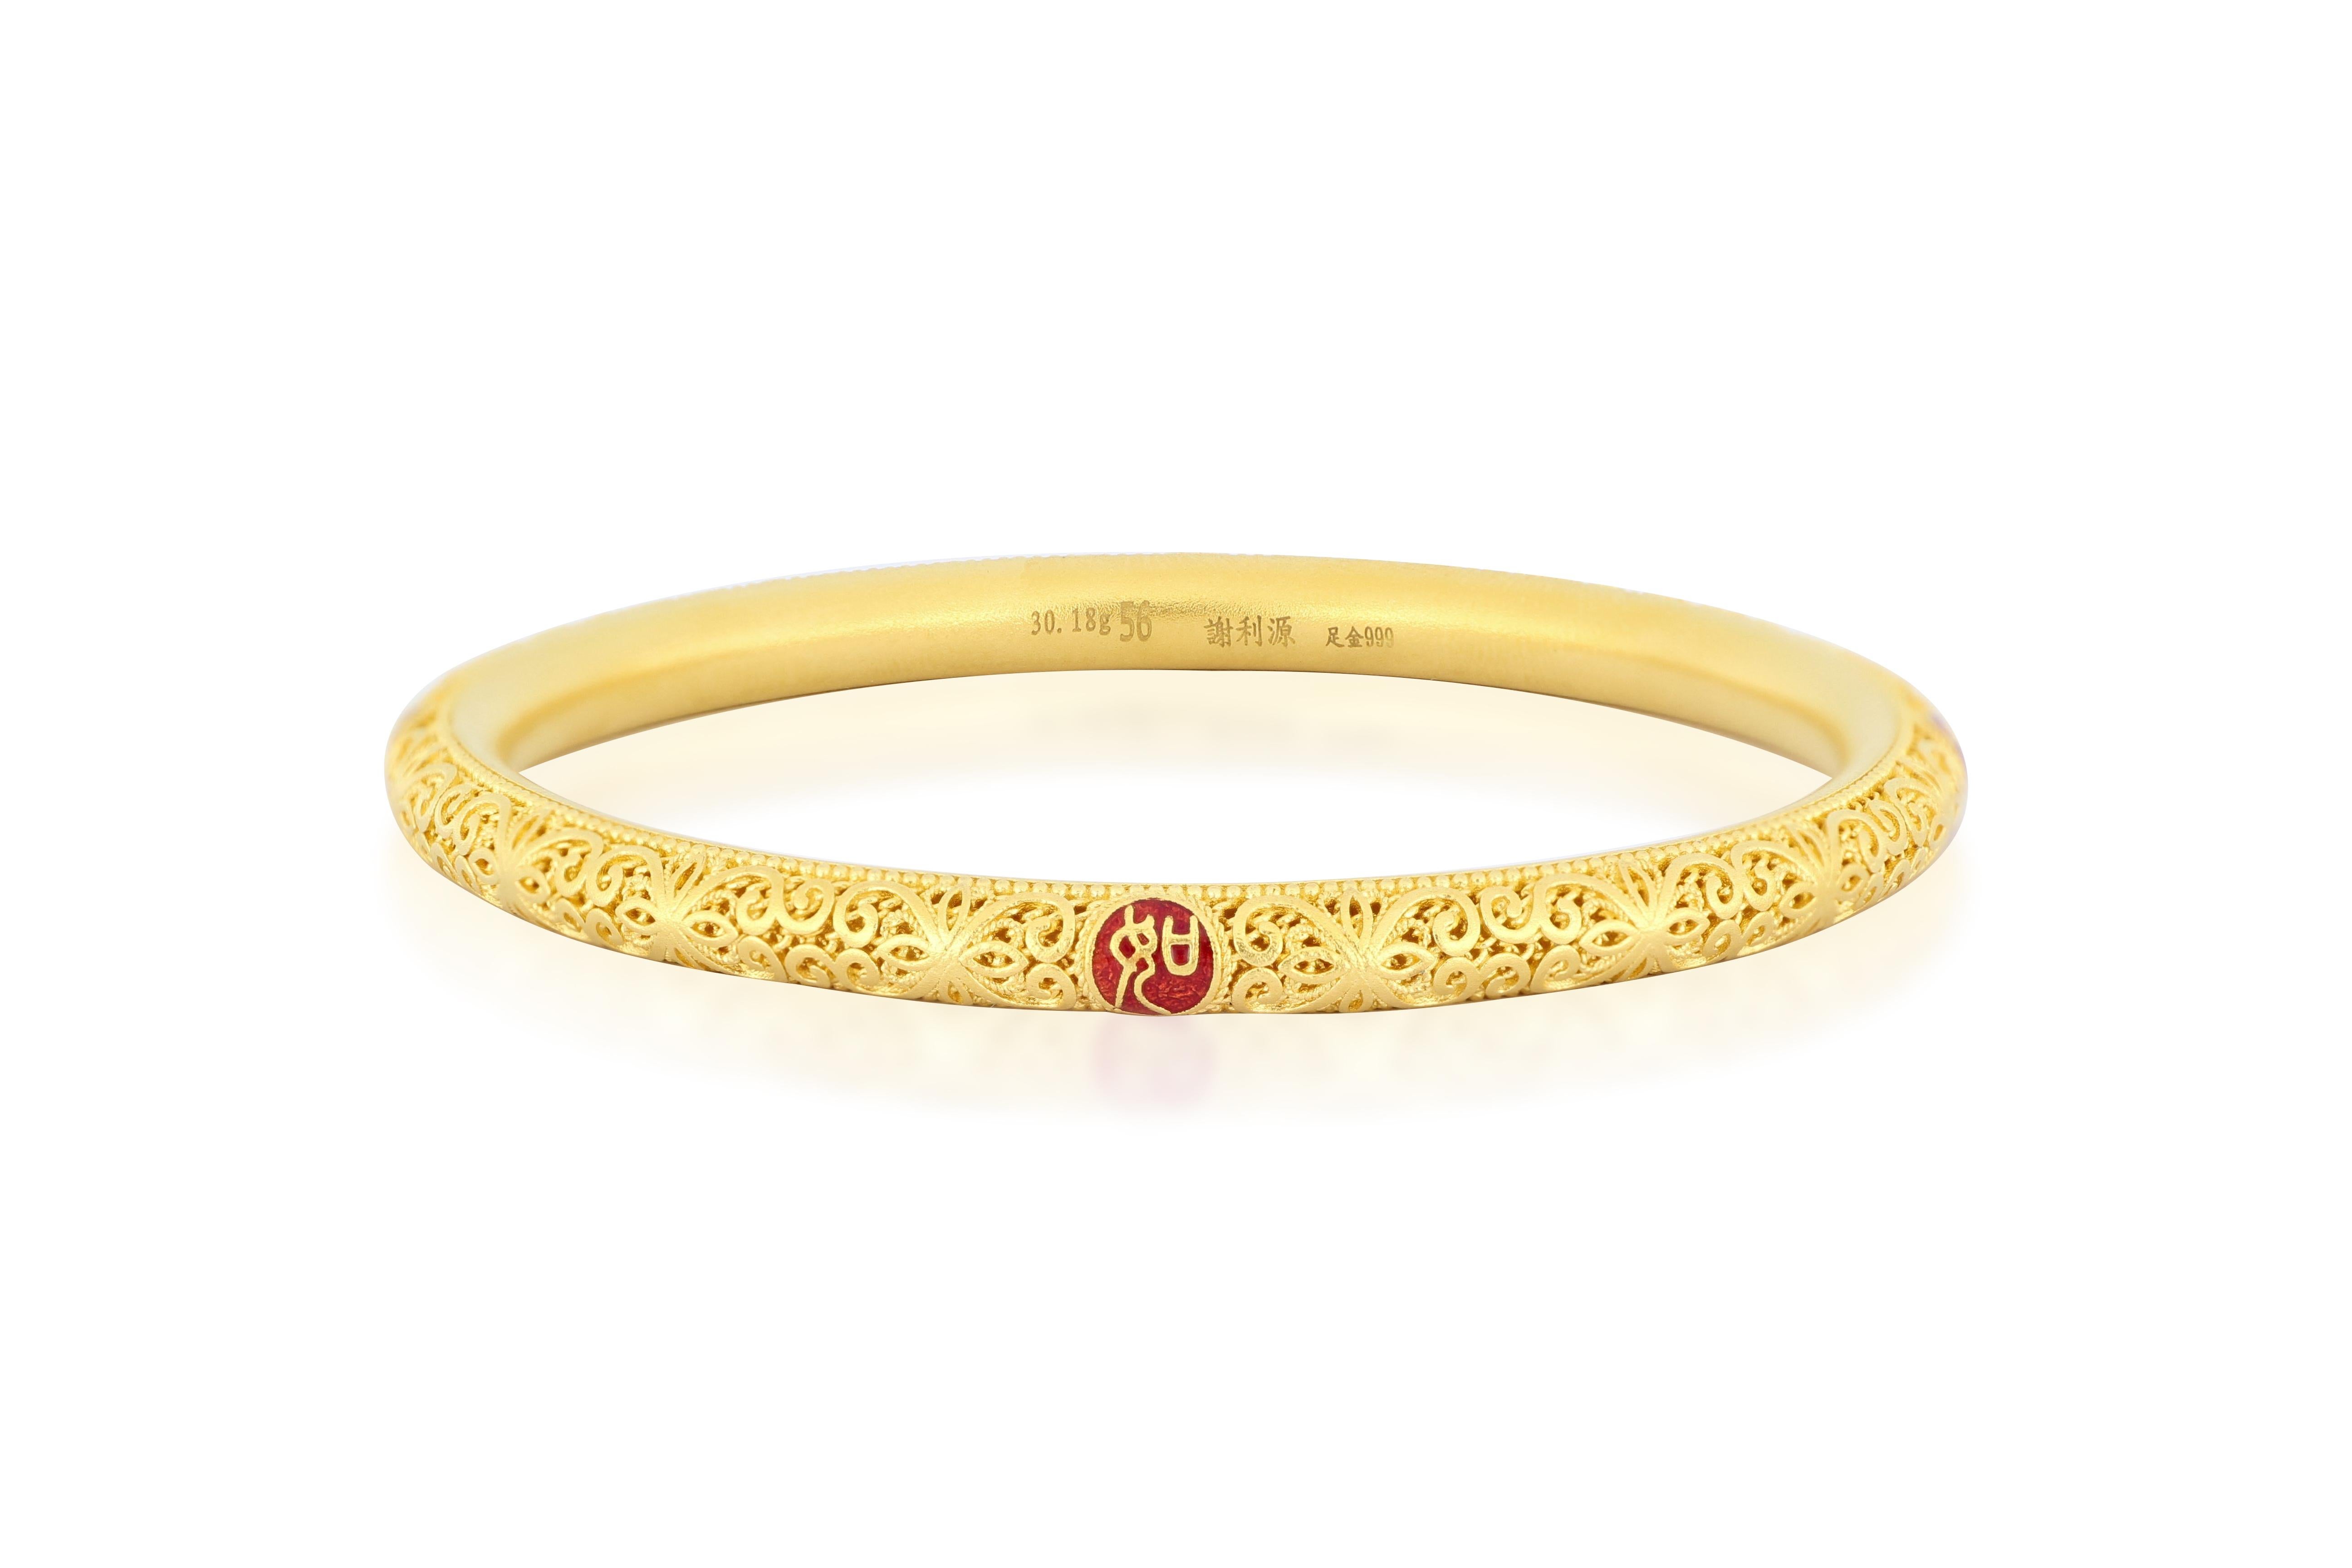 99.9% Pure gold bangle with Filigree Inlay Art For Sale